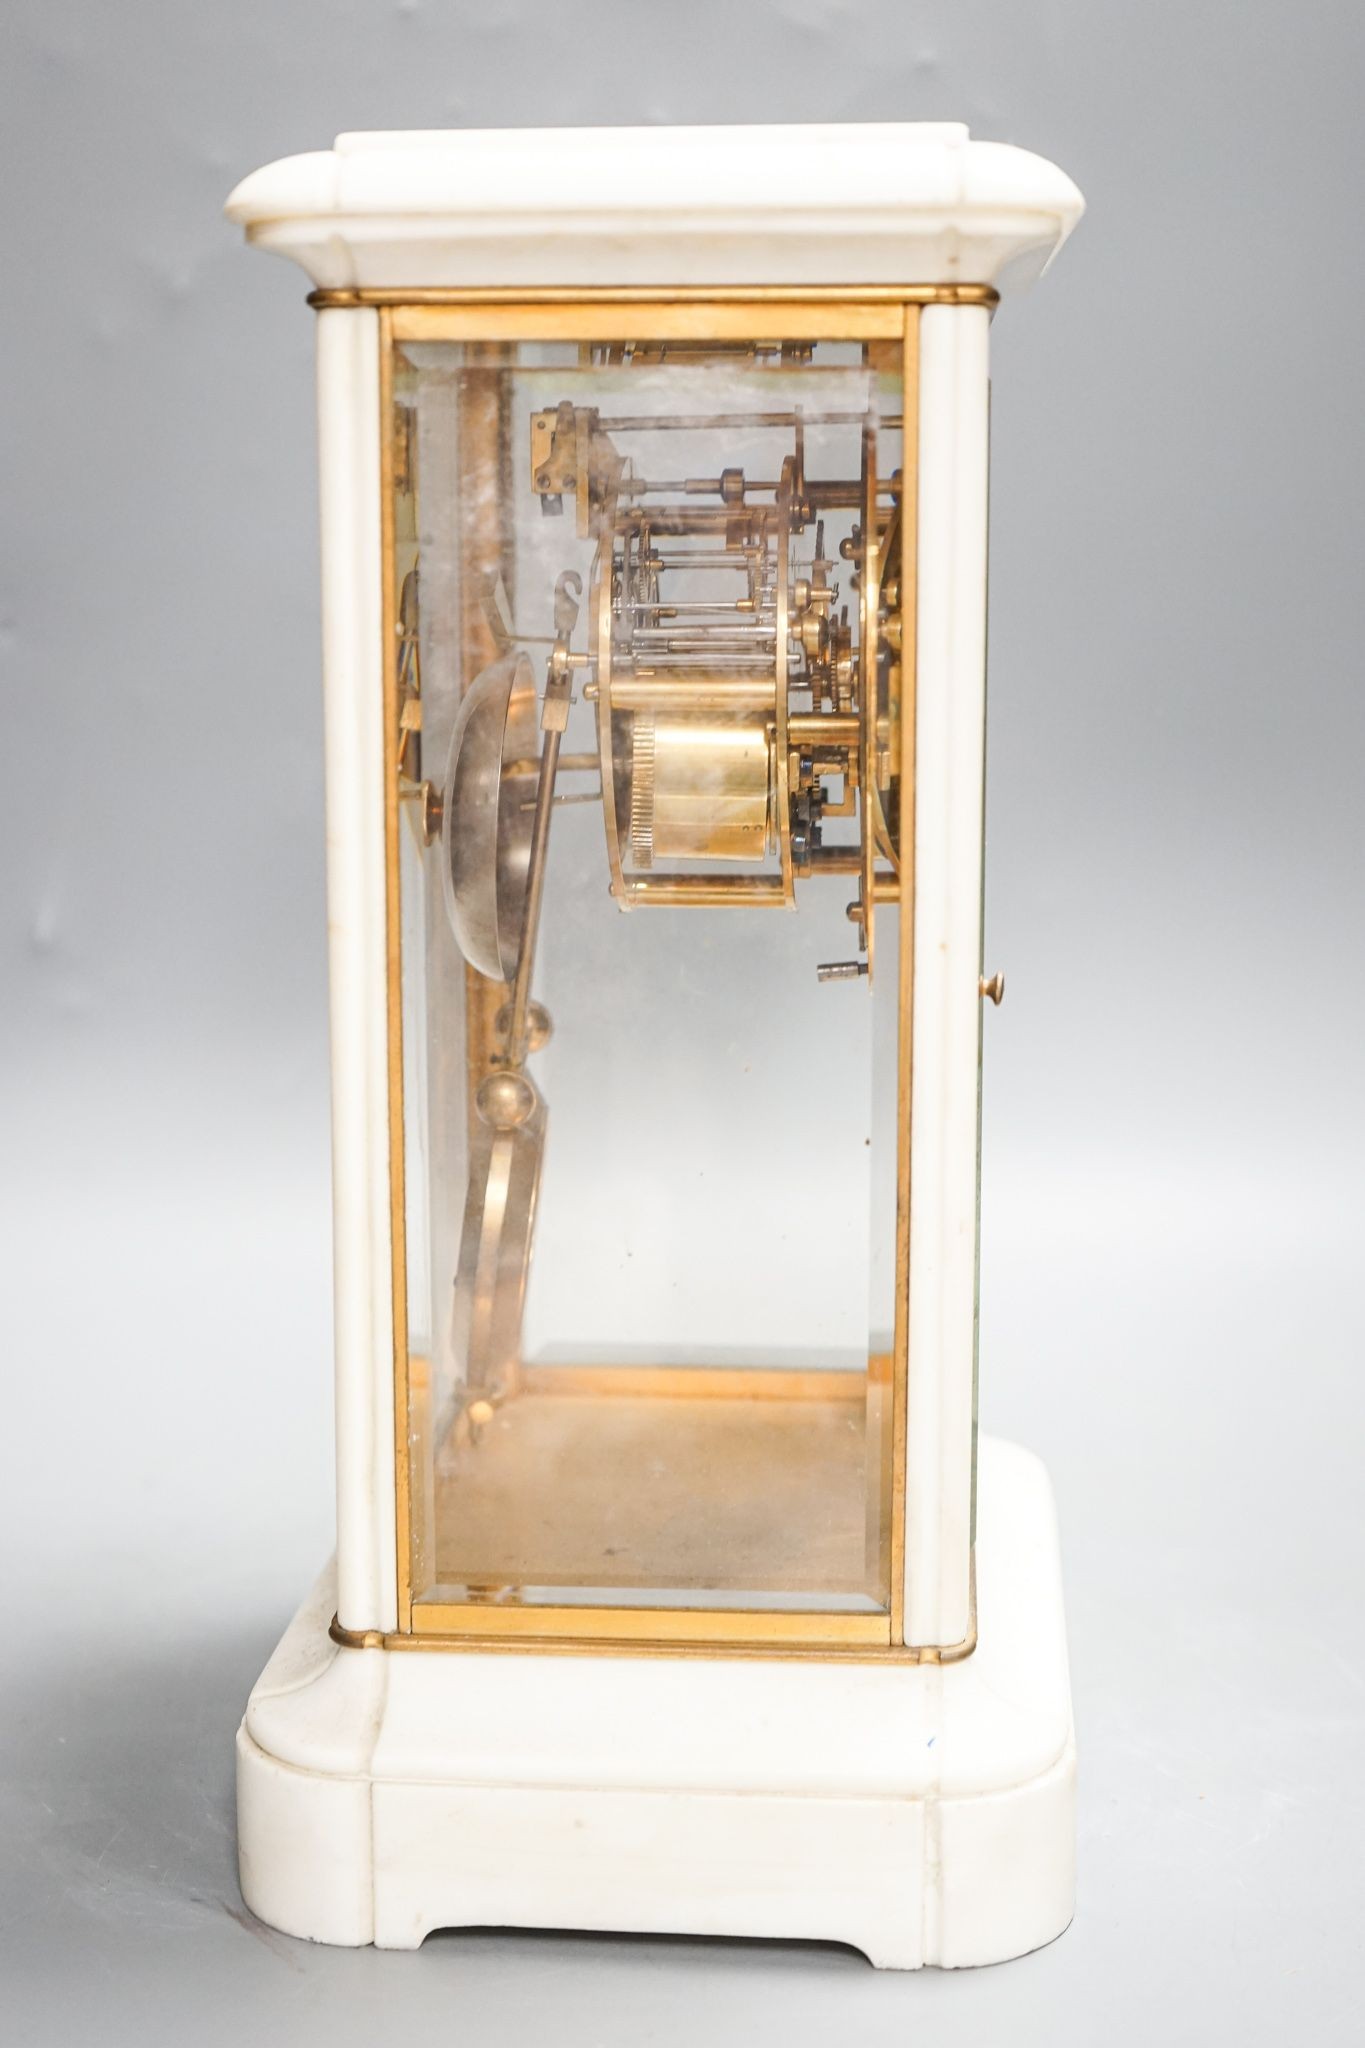 An unusual French white marble and brass cased four glass mantel clock, late 19th century, bi-metallic pendulum, no key. 32cm